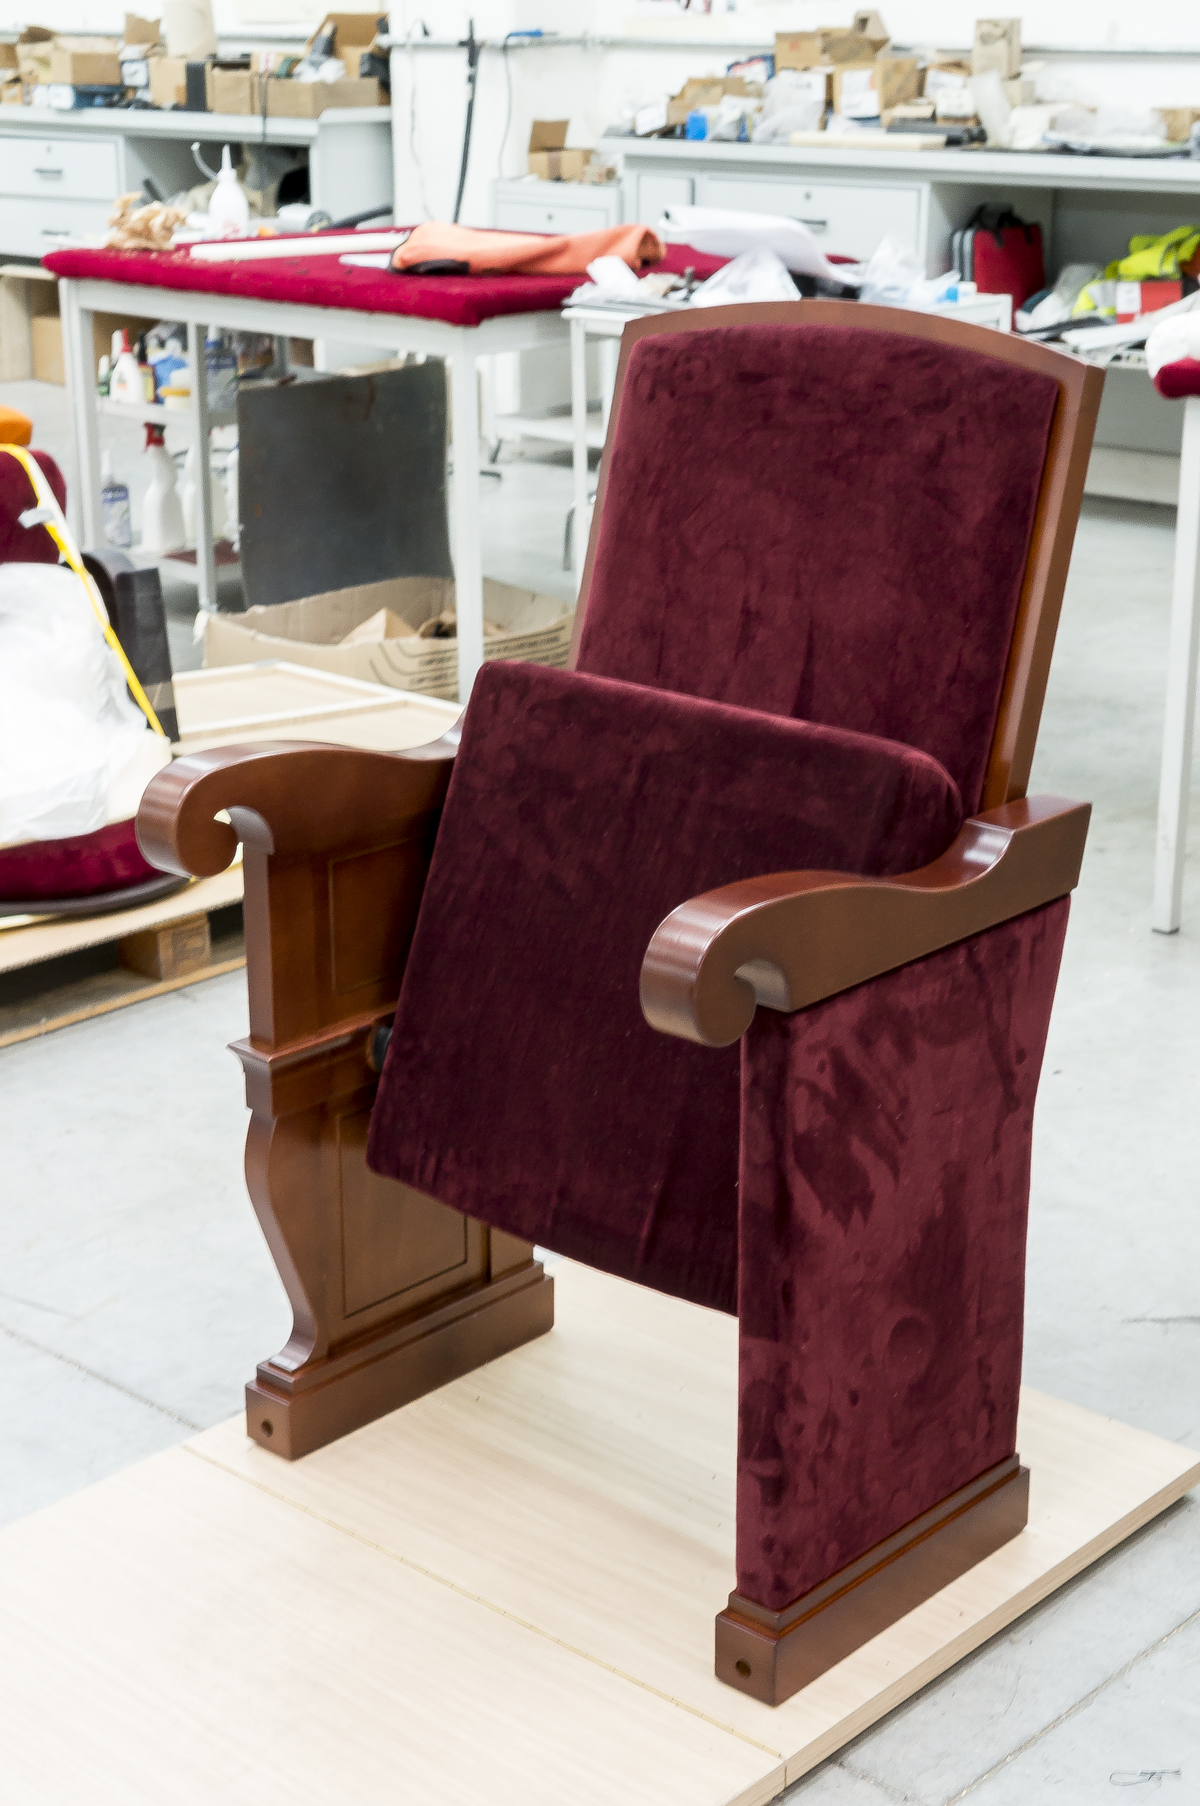 New Theatre Seating Chairs - NOVAT - photo 13